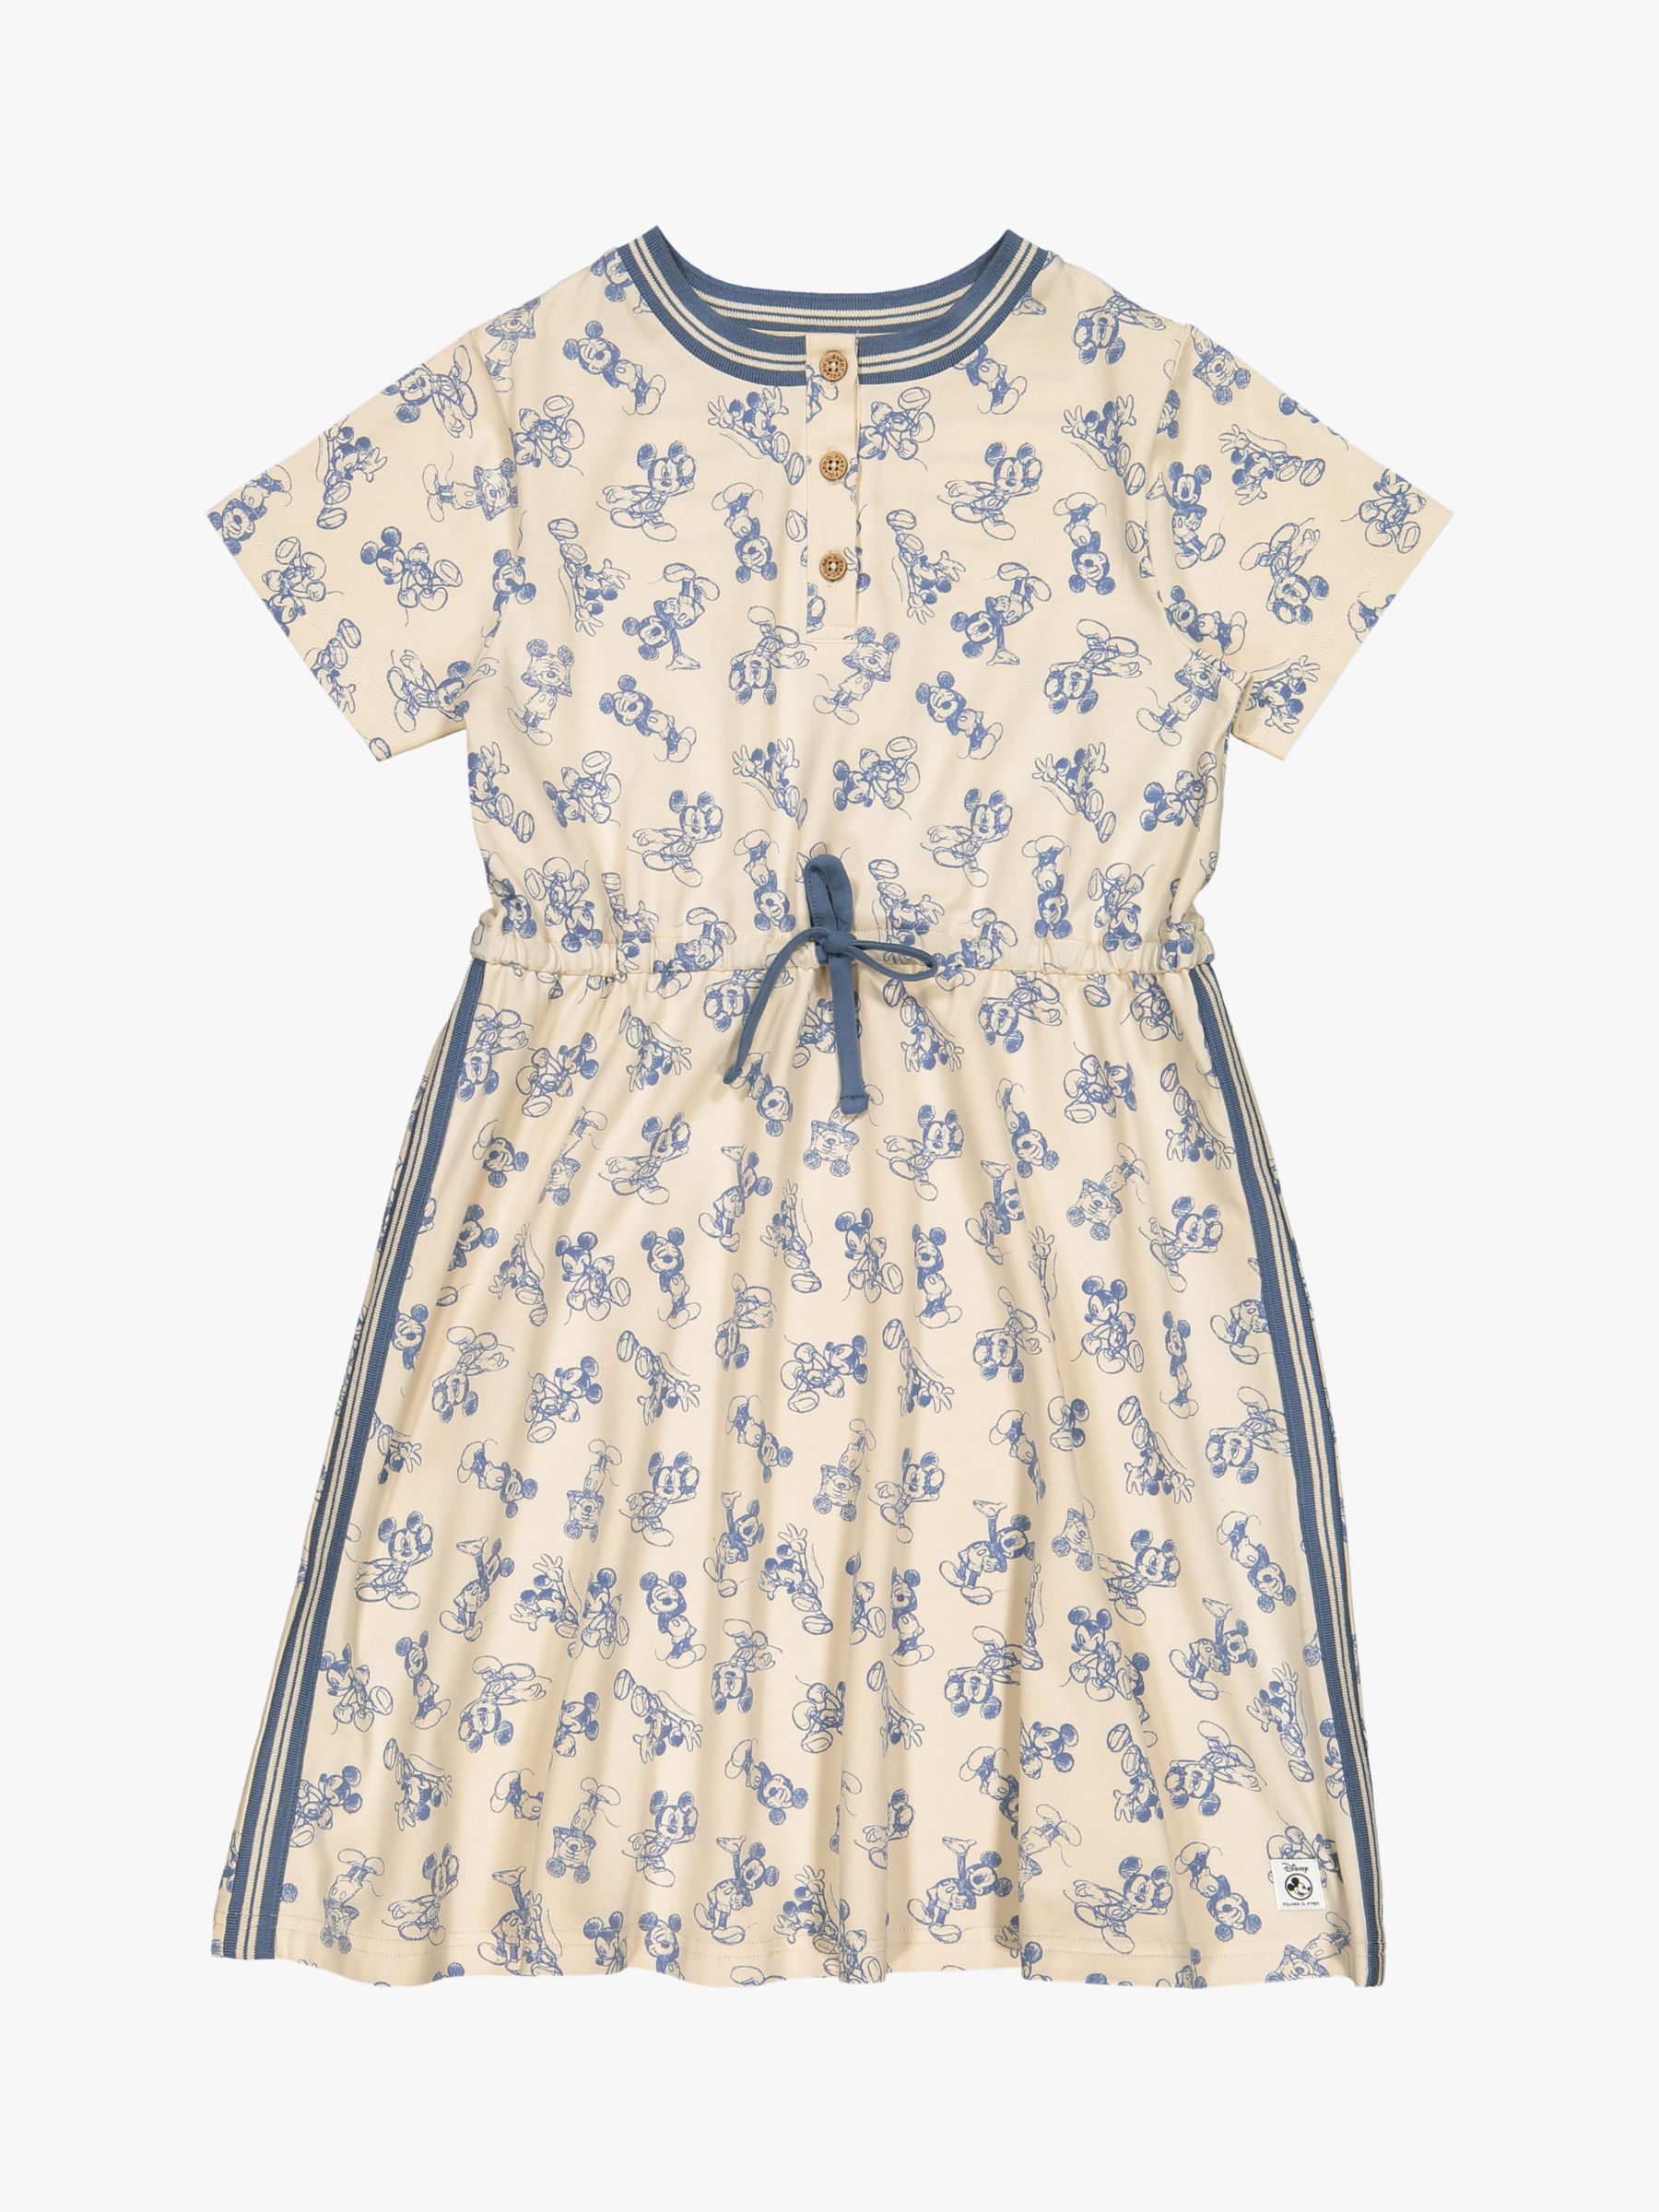 Image of Polarn O Pyret Girls GOTS Organic Cotton Mickey Mouse Dress Beige